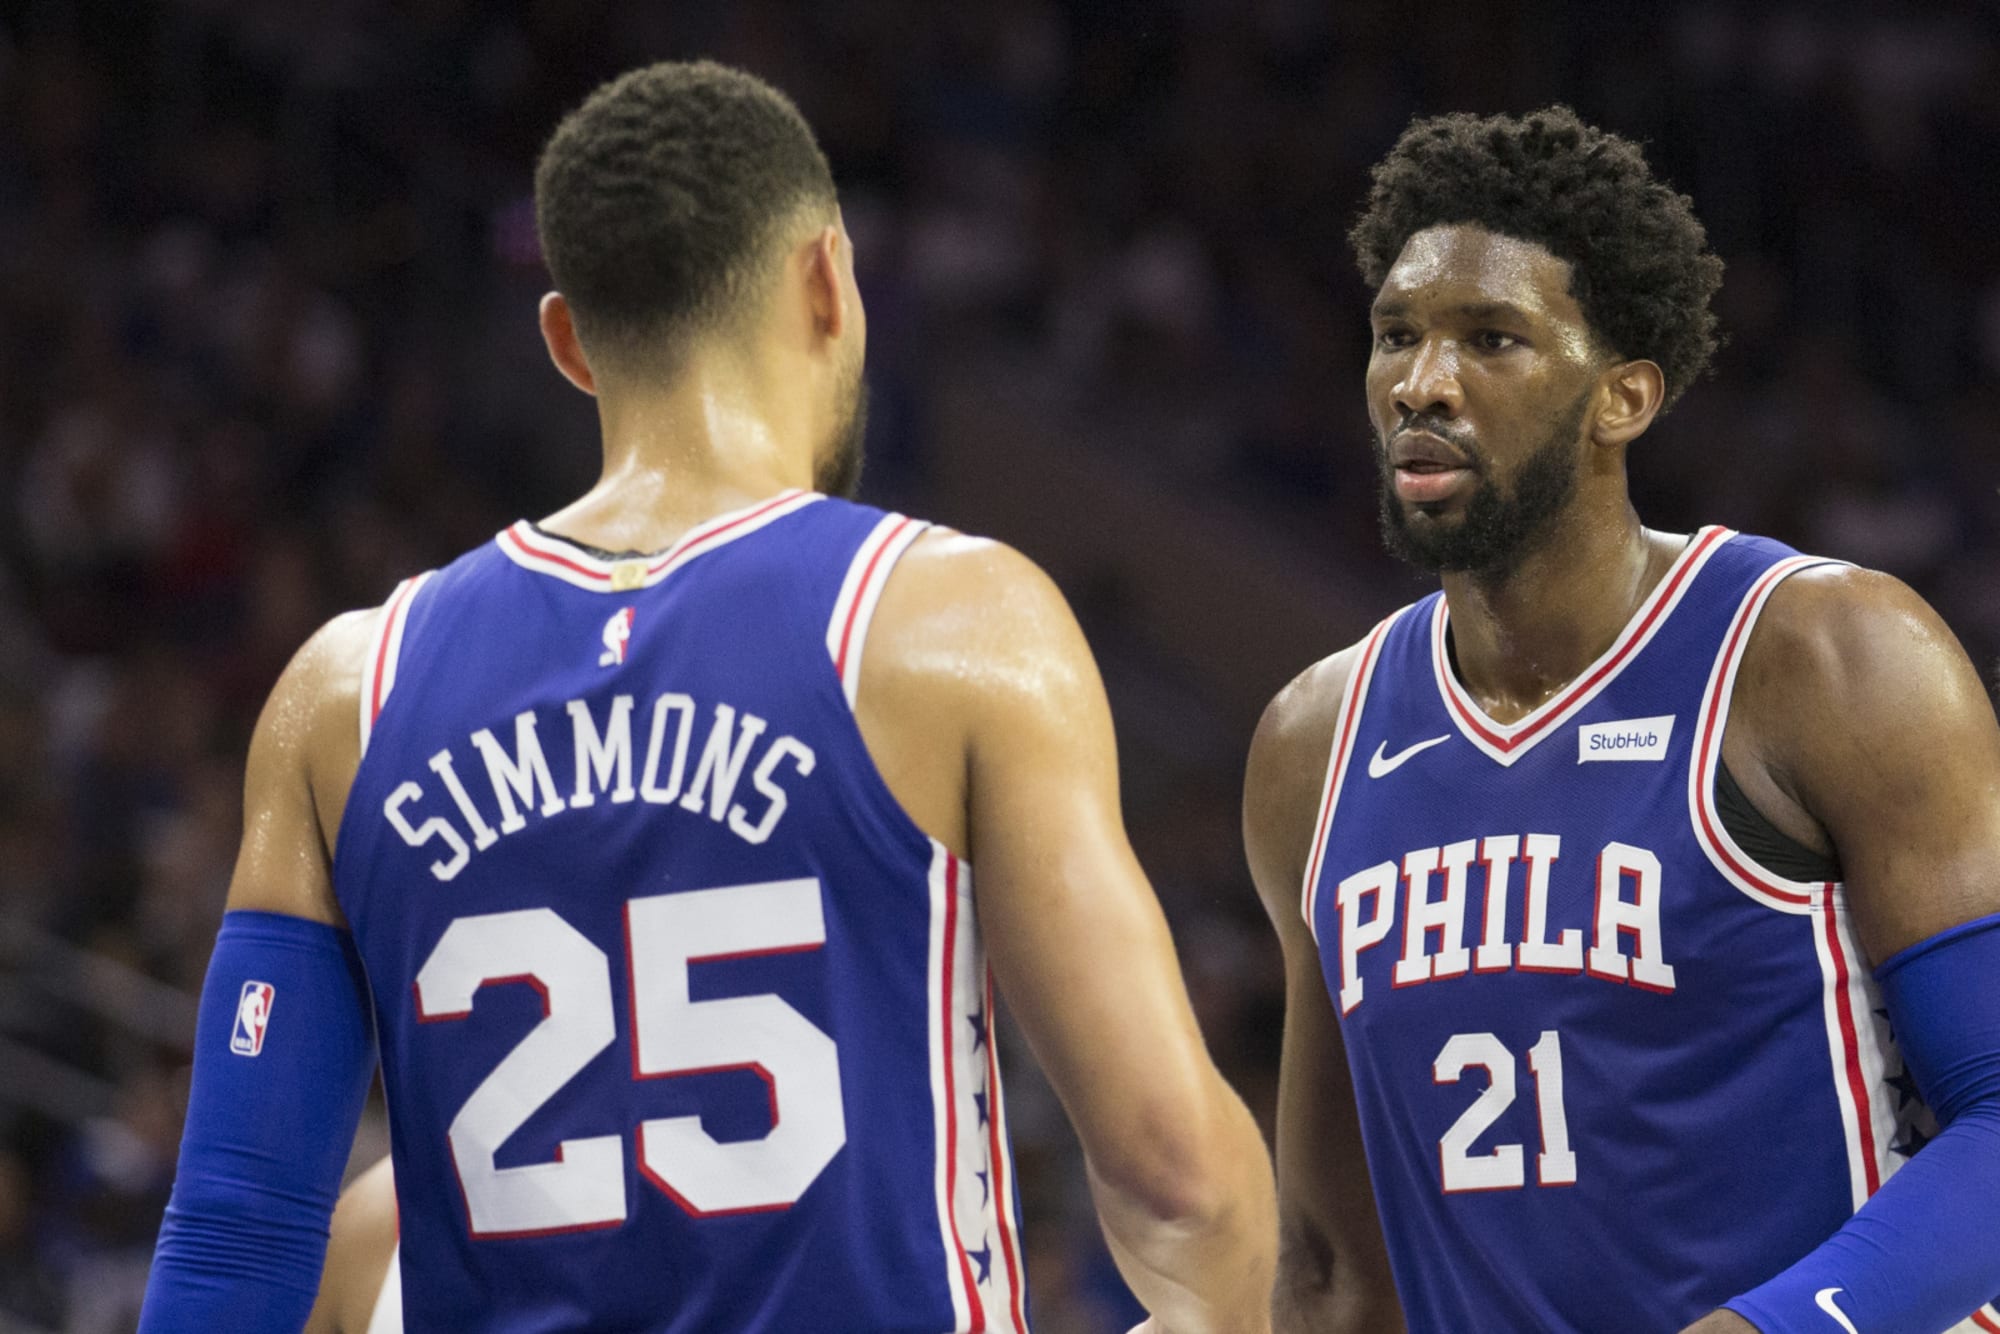 Philadelphia 76ers How Philly Trusted The Process And Built A Contender